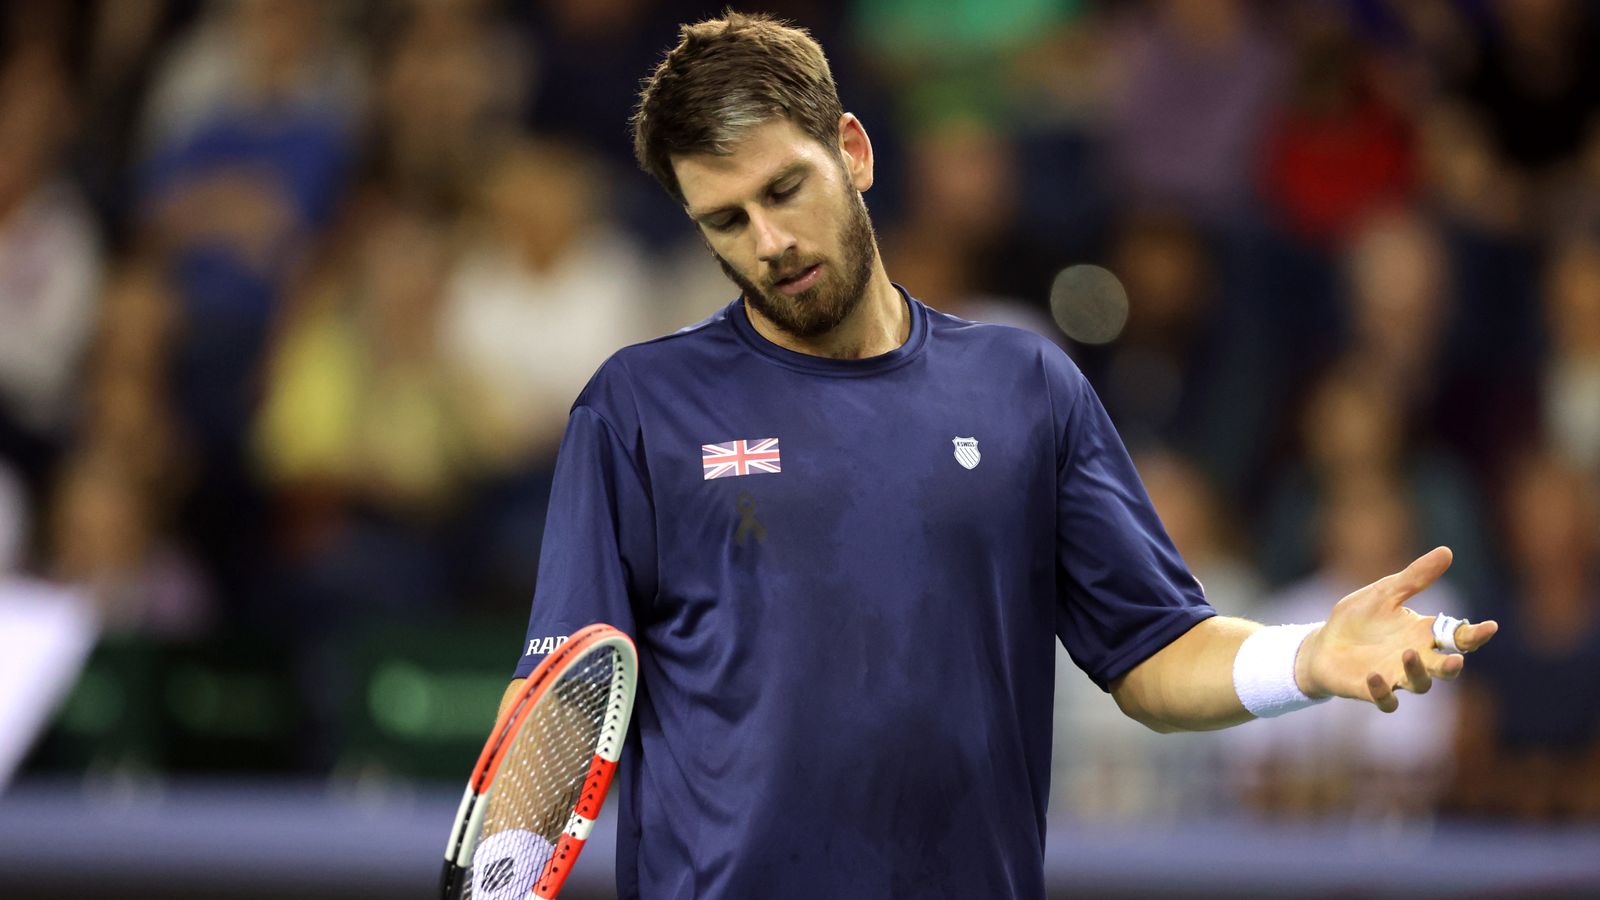 cameron-norrie-pulls-out-of-korea-open-quarter-final-against-jenson-brooksby-due-to-covid-19